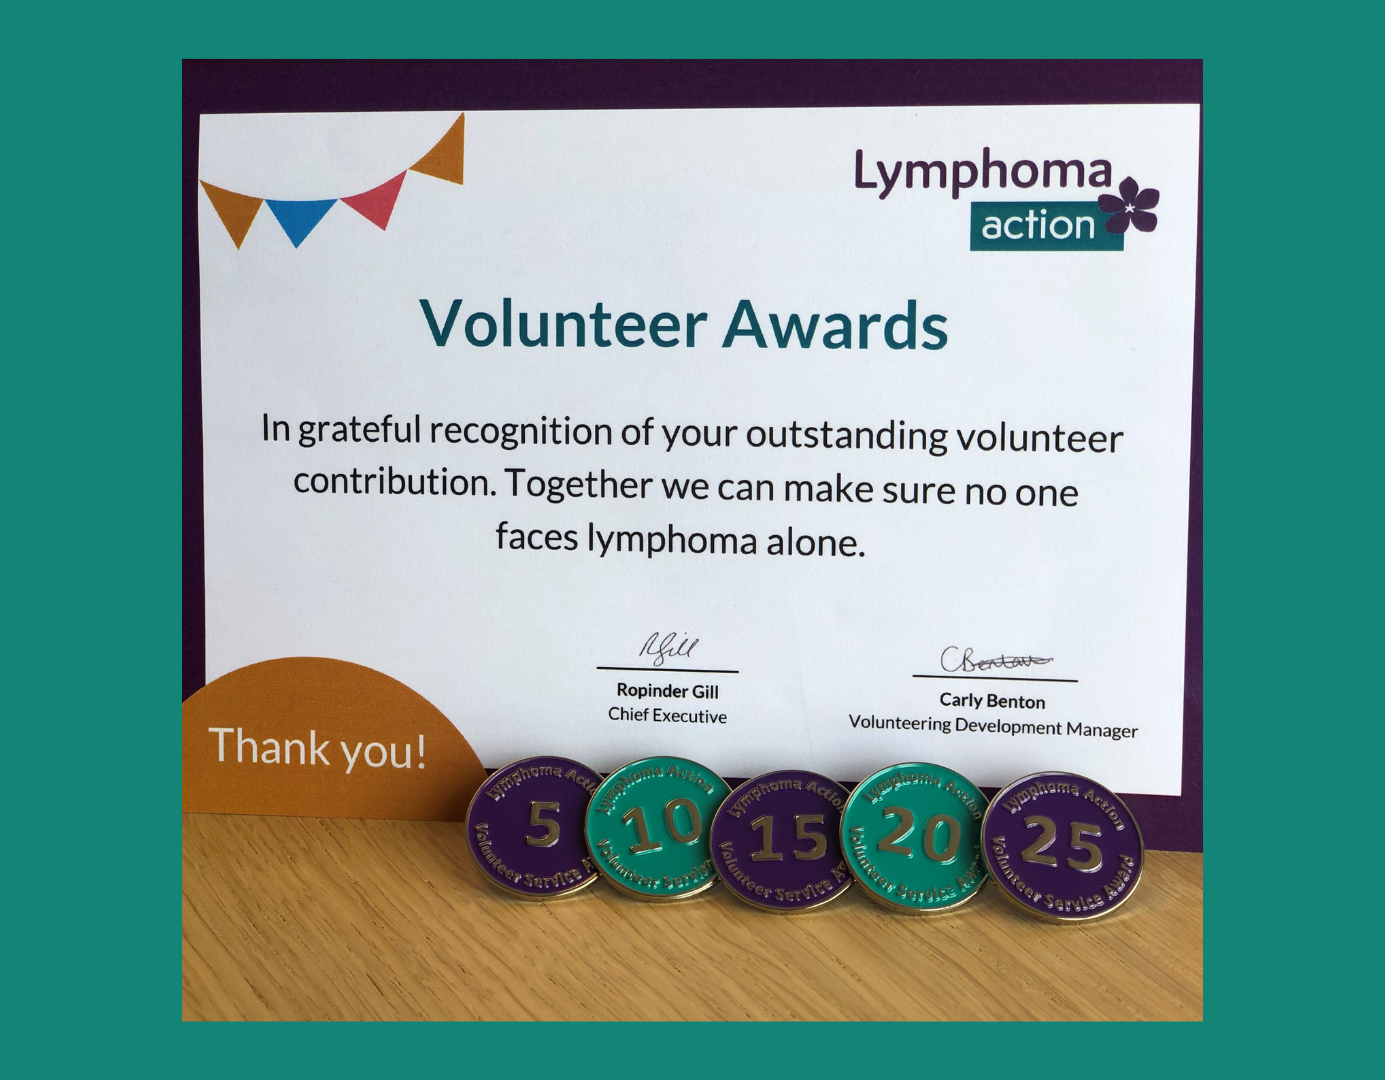 Image of Lymphoma Action Volunteer Awards certificate and badges